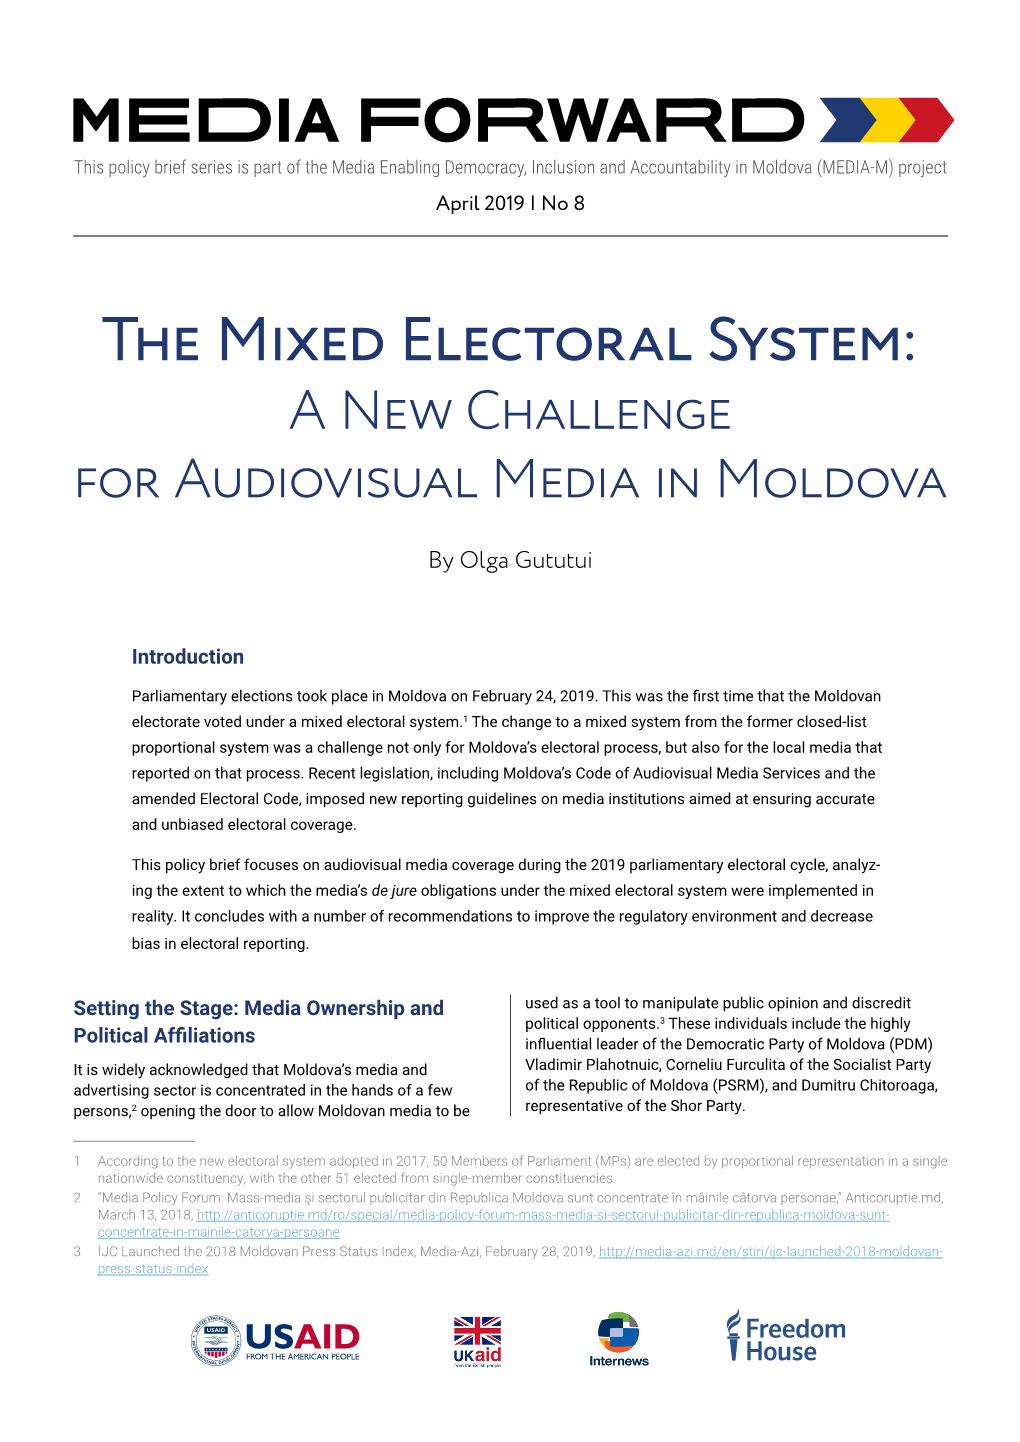 The Mixed Electoral System: a New Challenge for Audiovisual Media in Moldova